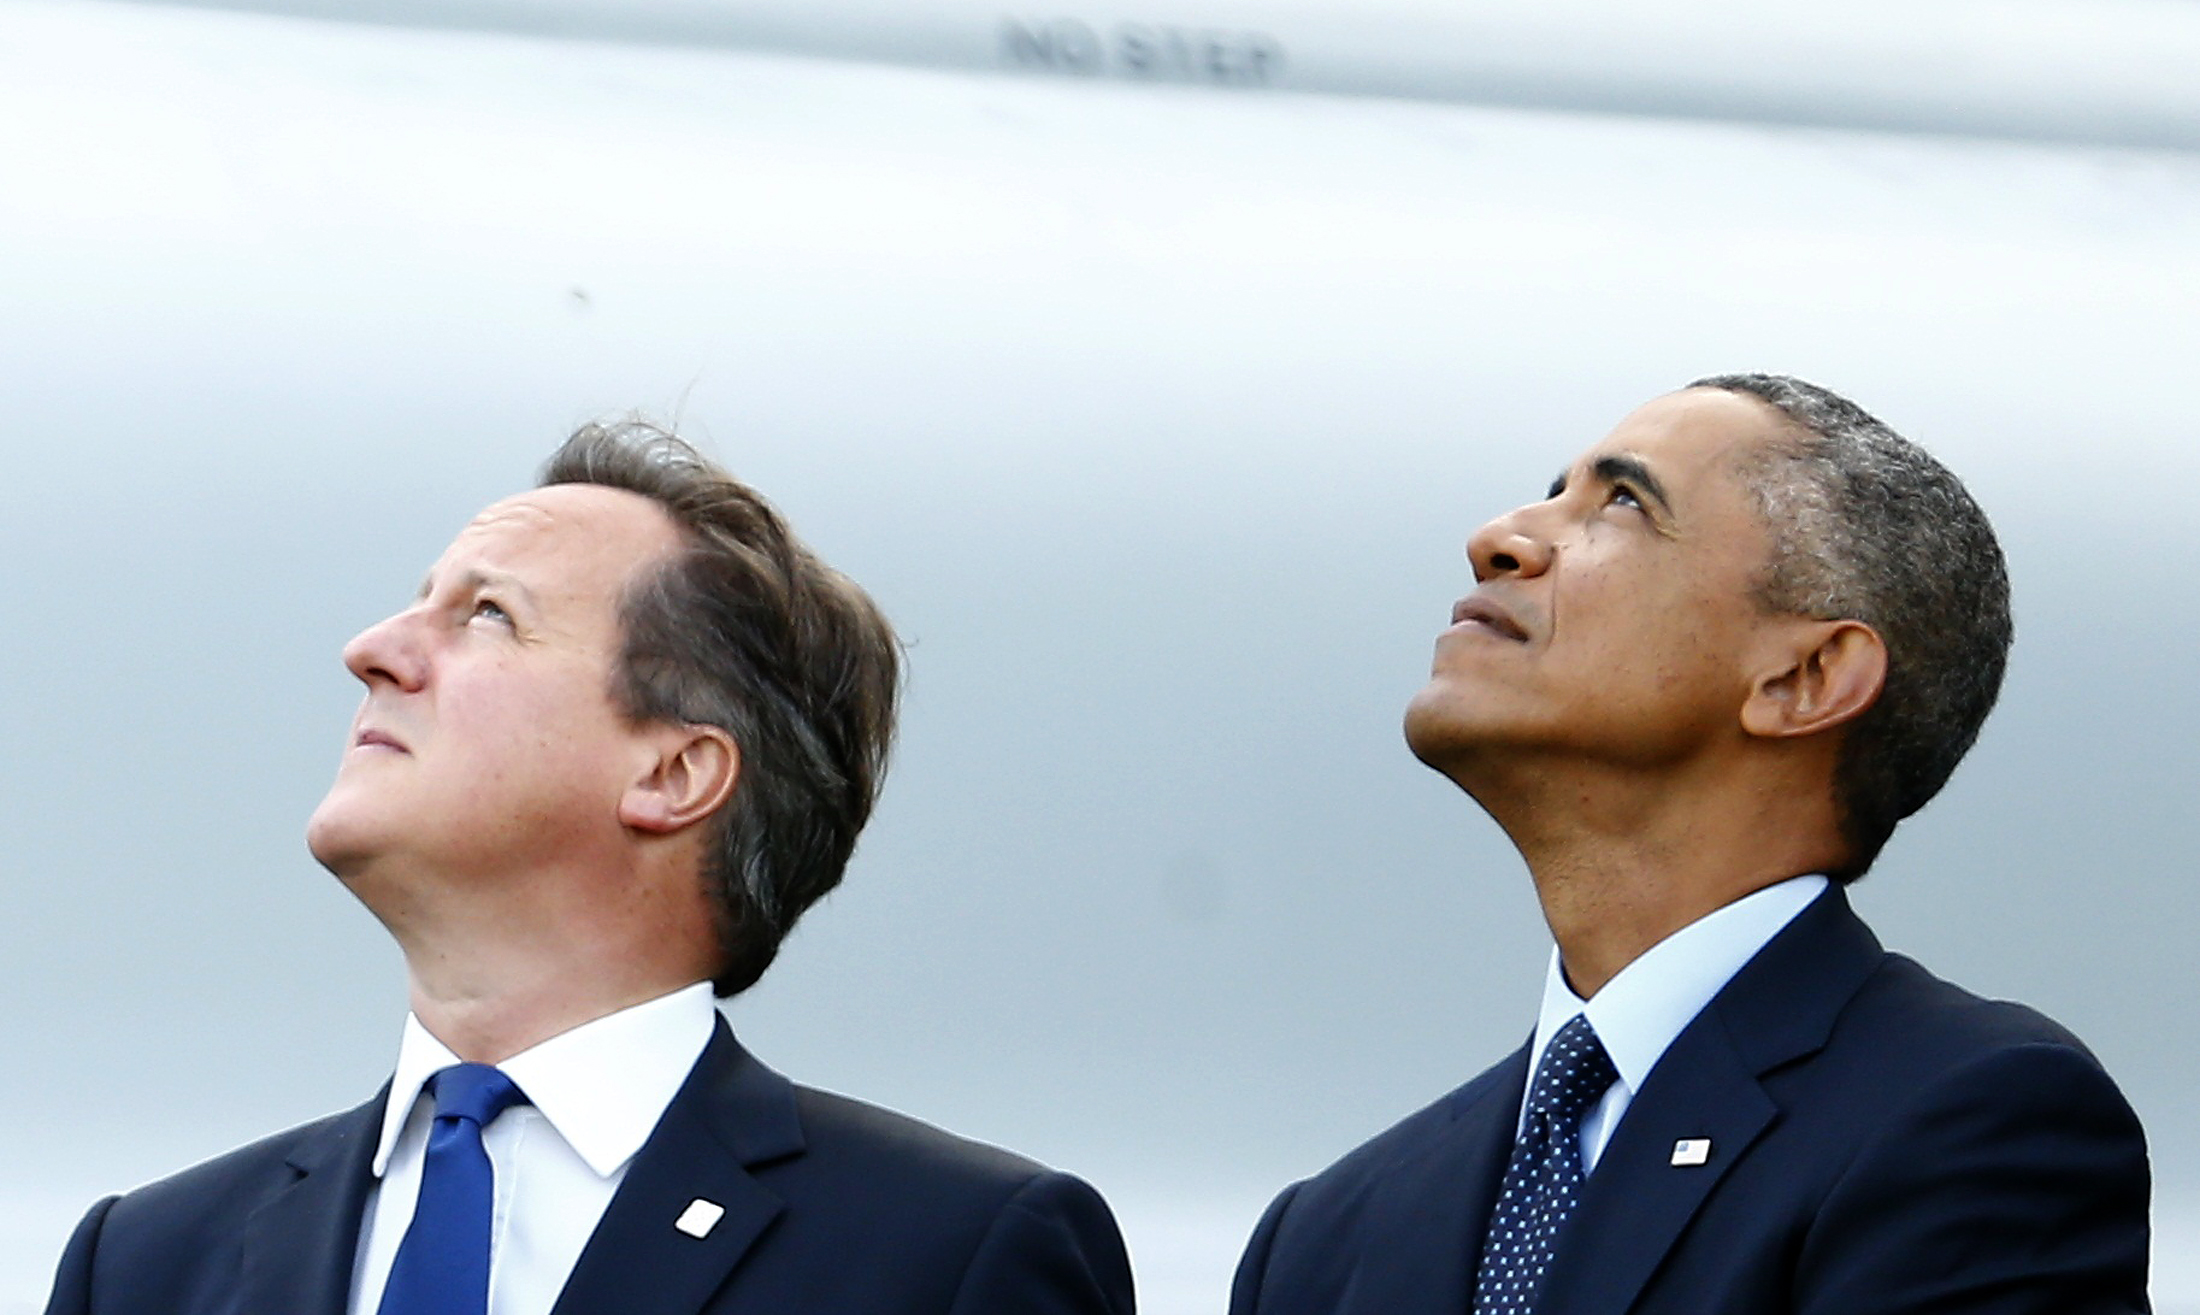 Britain's Prime Minister David Cameron and U.S. President Barack Obama watch a fly-past by the Red Arrows during the NATO summit at the Celtic Manor resort, near Newport